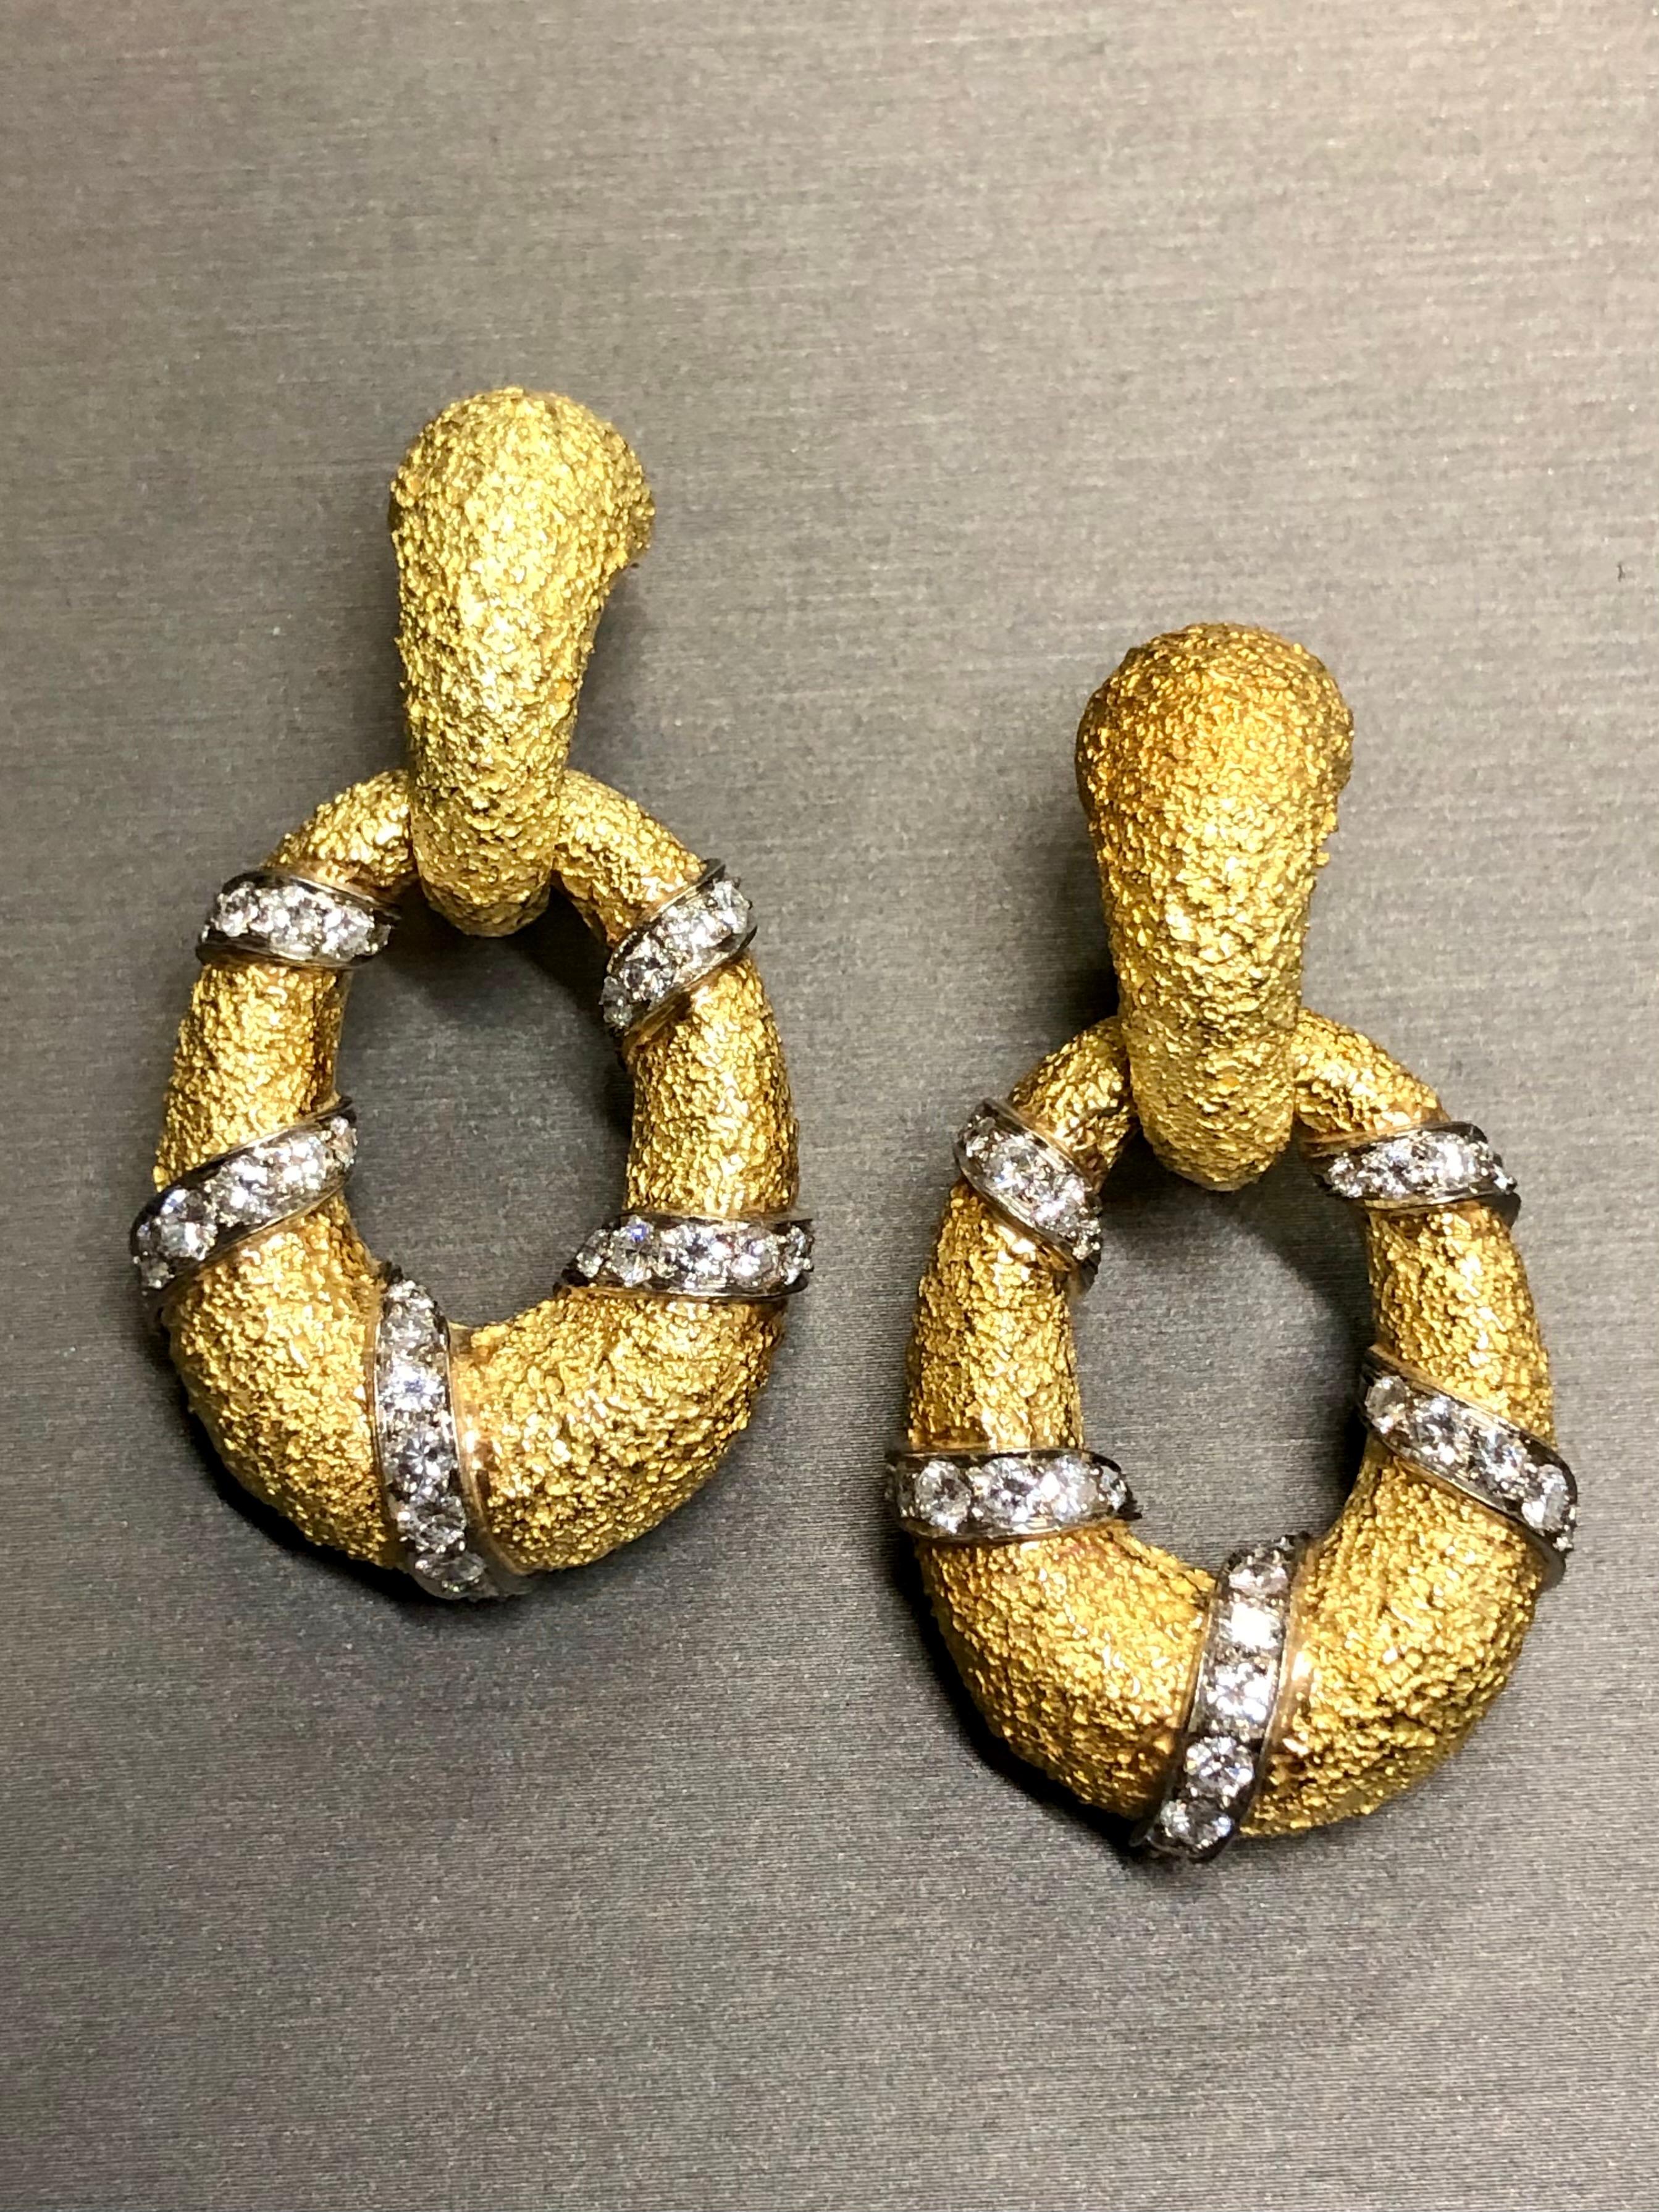 These earrings exhibit the fine detail and craftsmanship that only Van Cleef and Arpels (FRANCE) can produce. Finely made in 18K textured yellow gold, they have been set with only the finest diamonds totaling approximately 2.70cttw.